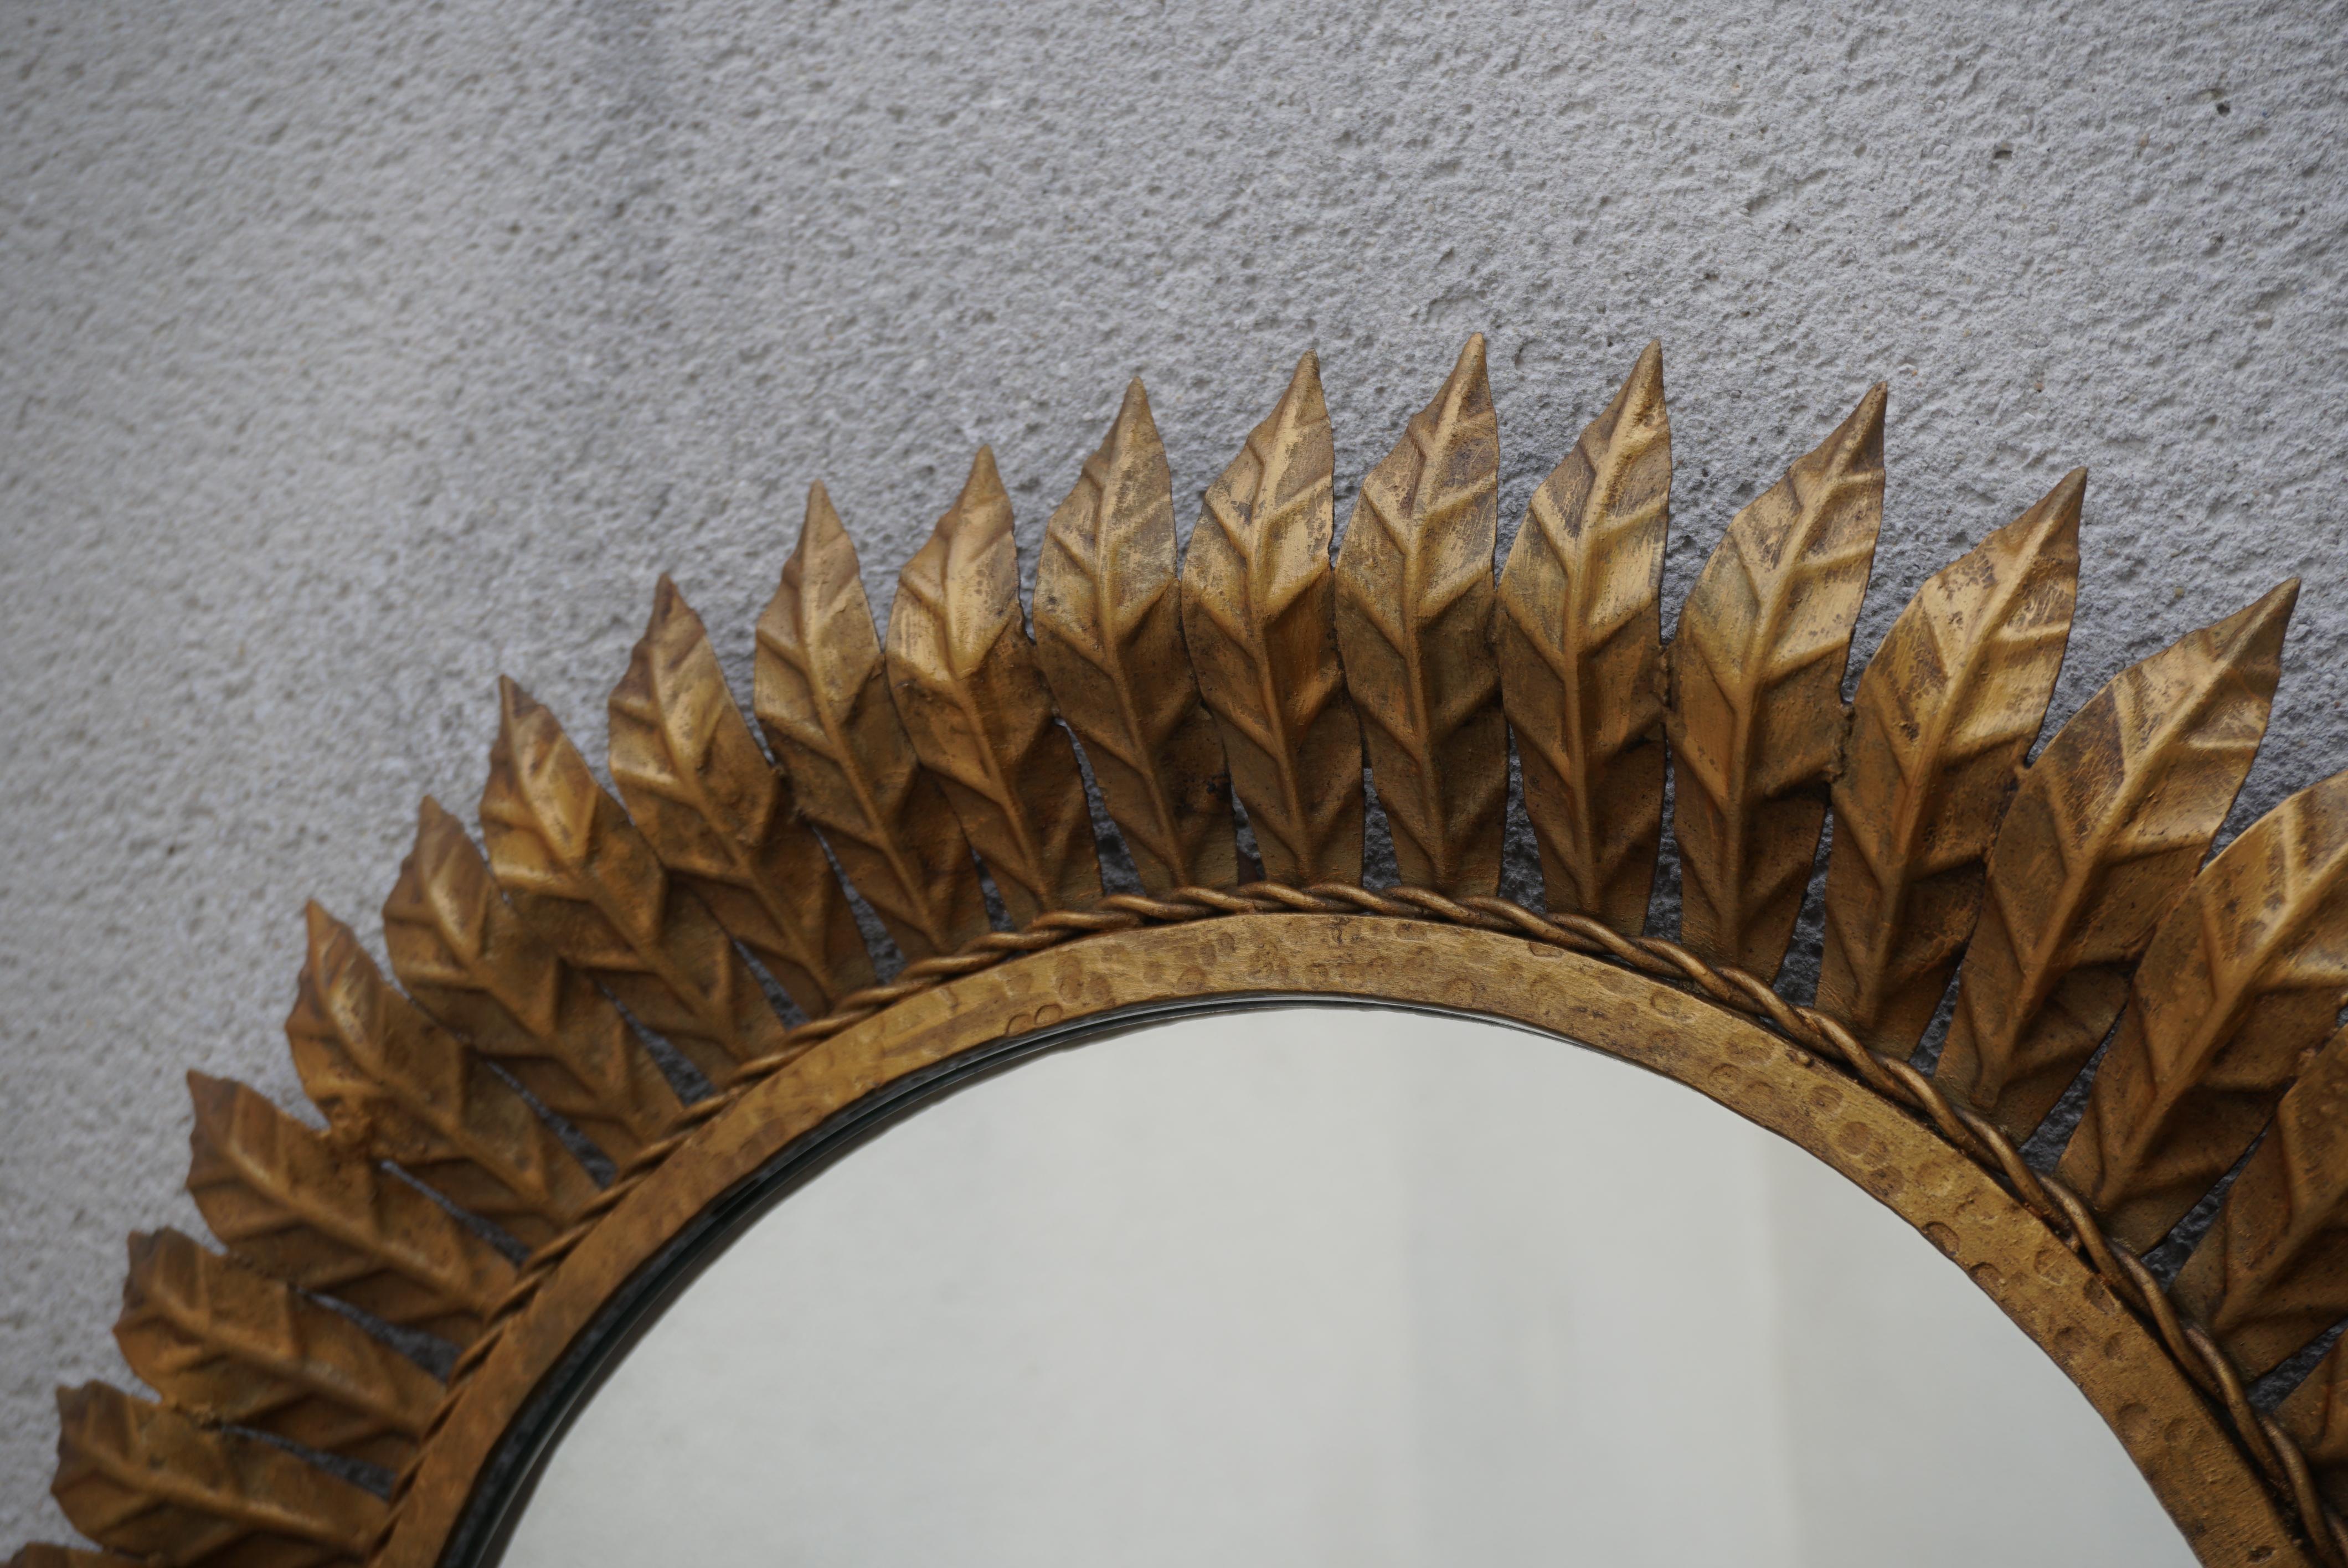 Hollywood Regency Sunburst Mirror, Framed with Gold-colored Metal Leaves, Italy 1970 For Sale